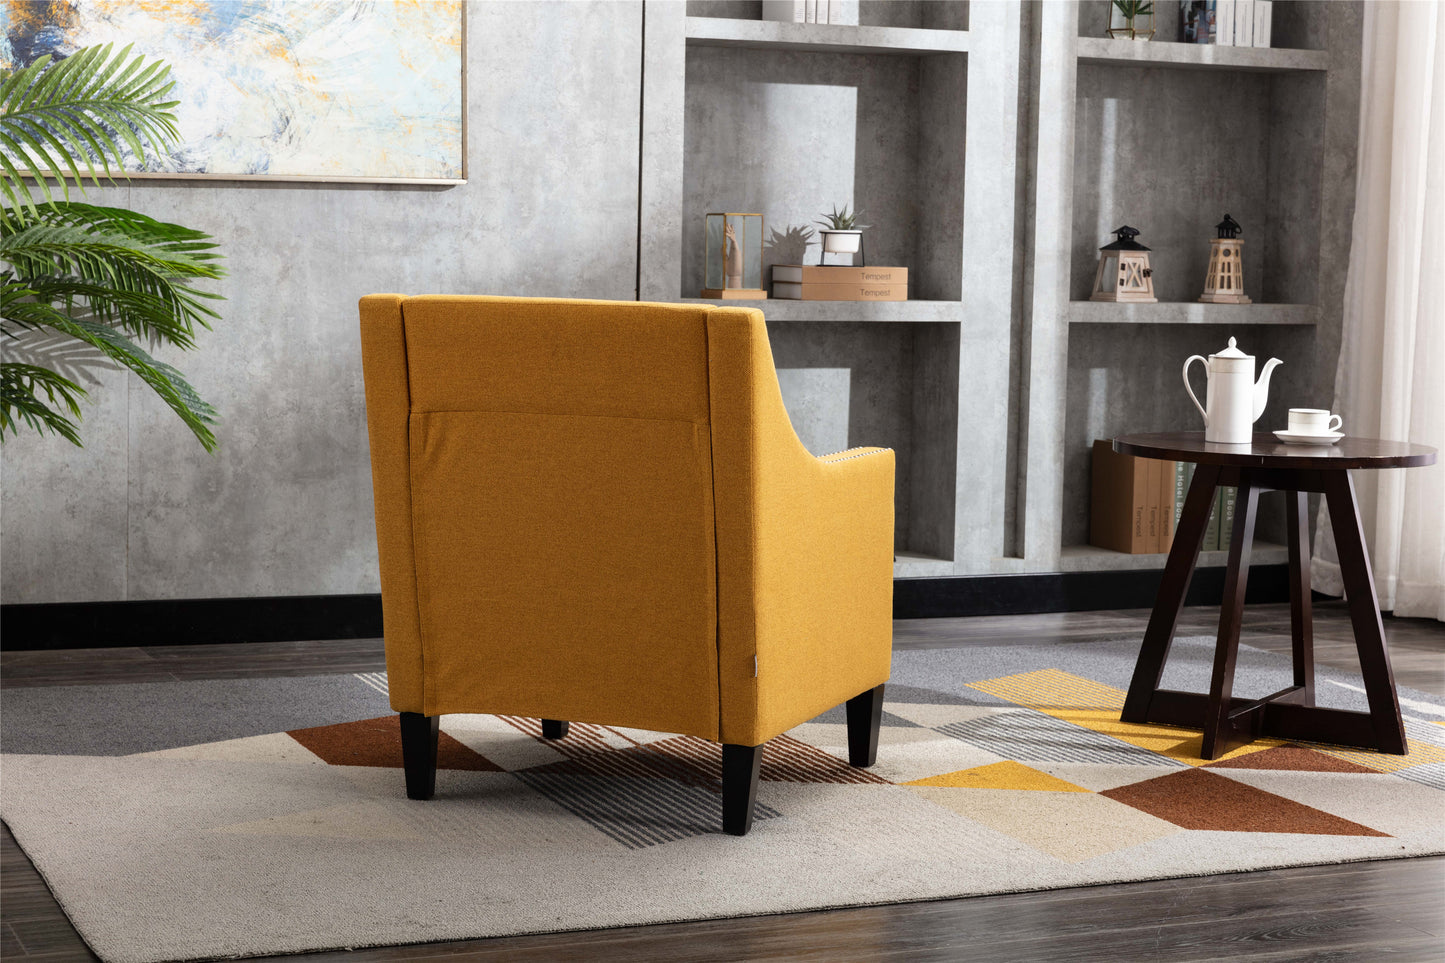 accent armchair living room chair  with nailheads and solid wood legs  Yellow  Linen